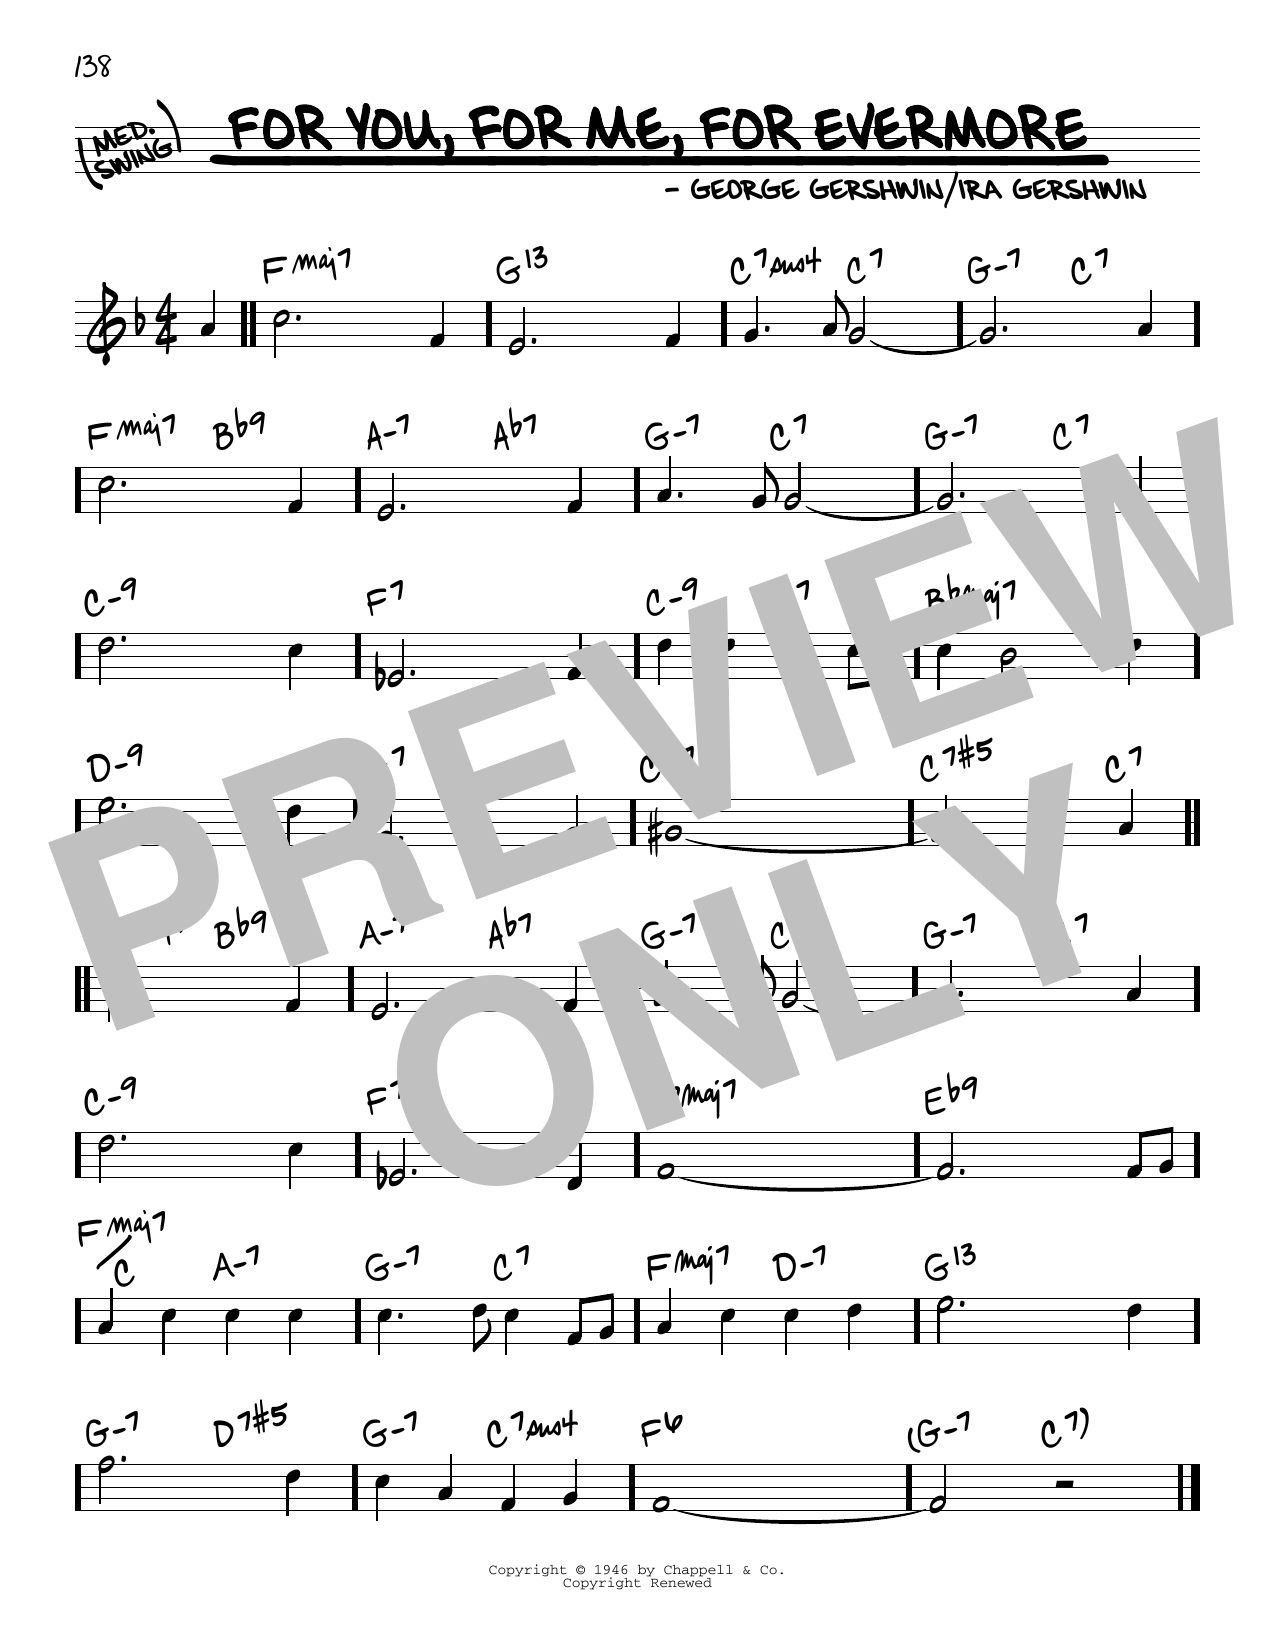 Download George Gershwin For You, For Me For Evermore Sheet Music